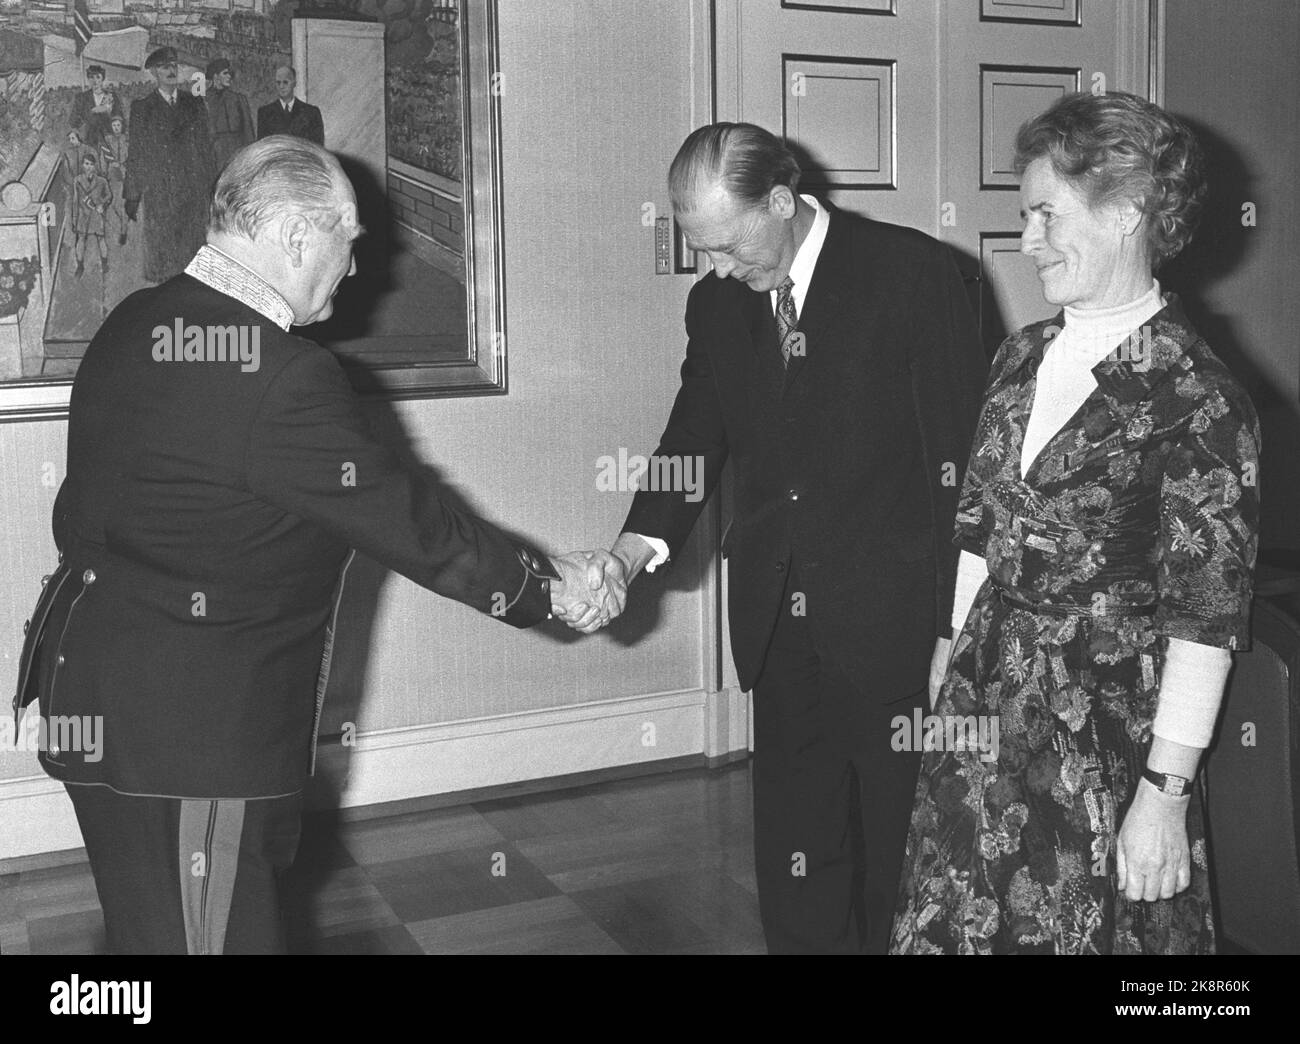 Oslo 19760115. The Government Nordli's first state visit to the Castle. King Olav greets Prime Minister Odvar Nordli following the new government's first minister at the Castle. By the Prime Minister's side, Justice Minister Inger Louise Valle. Photo: Oddvar Walle Jensen NTB / NTB Stock Photo